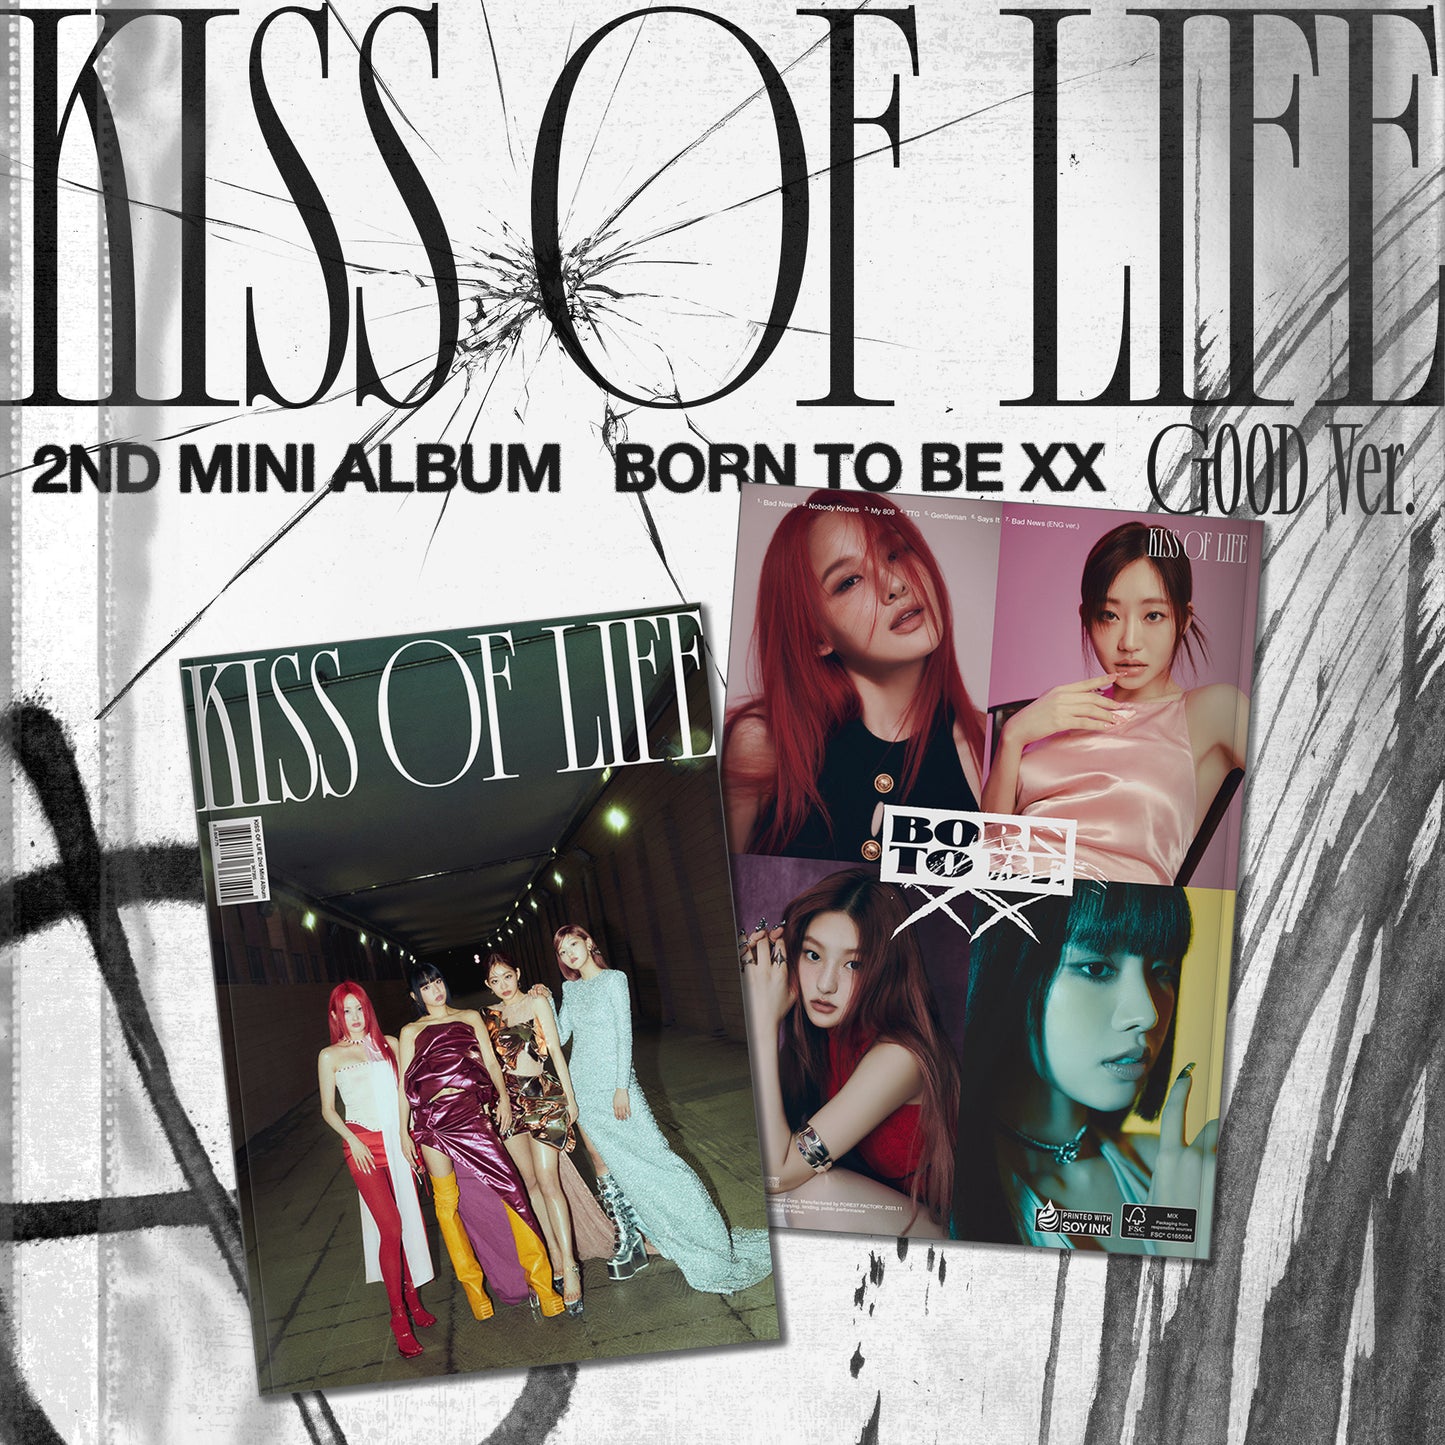 KISS OF LIFE - 2nd Mini-Album 'Born to be XX' [SIGNED ALBUM] (US Exclusive) (GOOD Version)